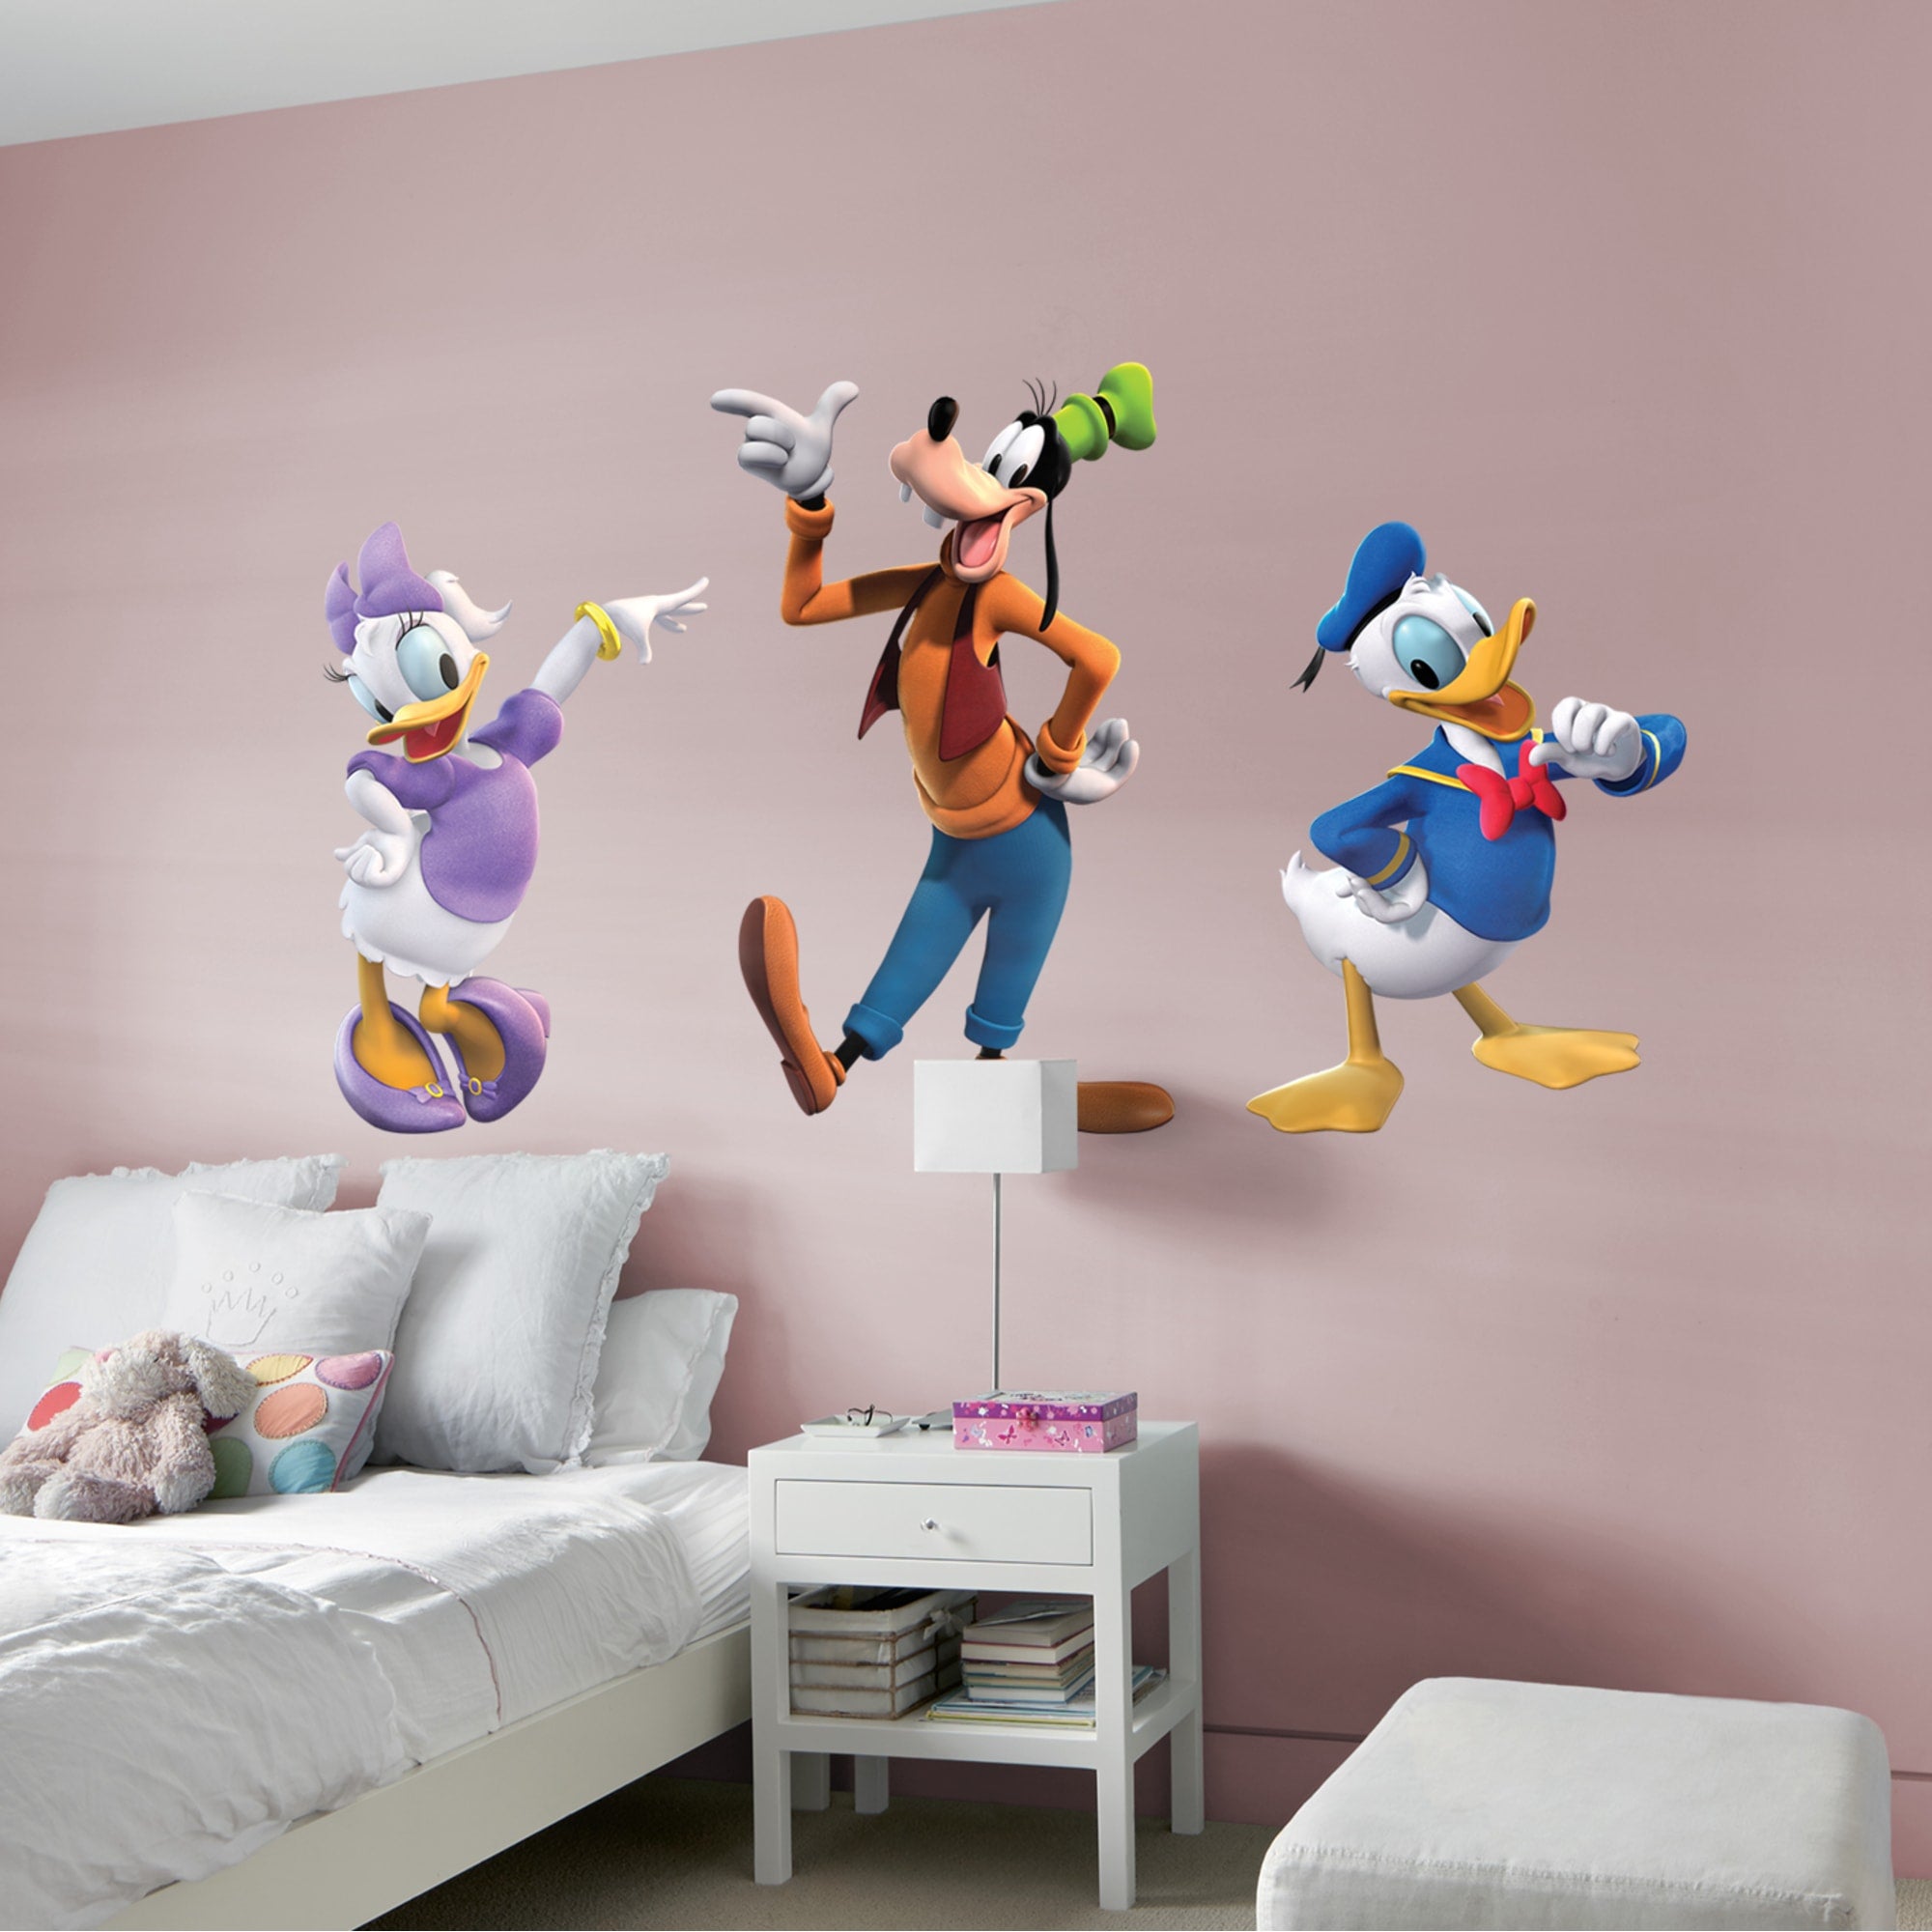 Disney: Donald, Daisy & Goofy - Officially Licensed Removable Wall Decals 79.0"W x 51.5"H by Fathead | Vinyl